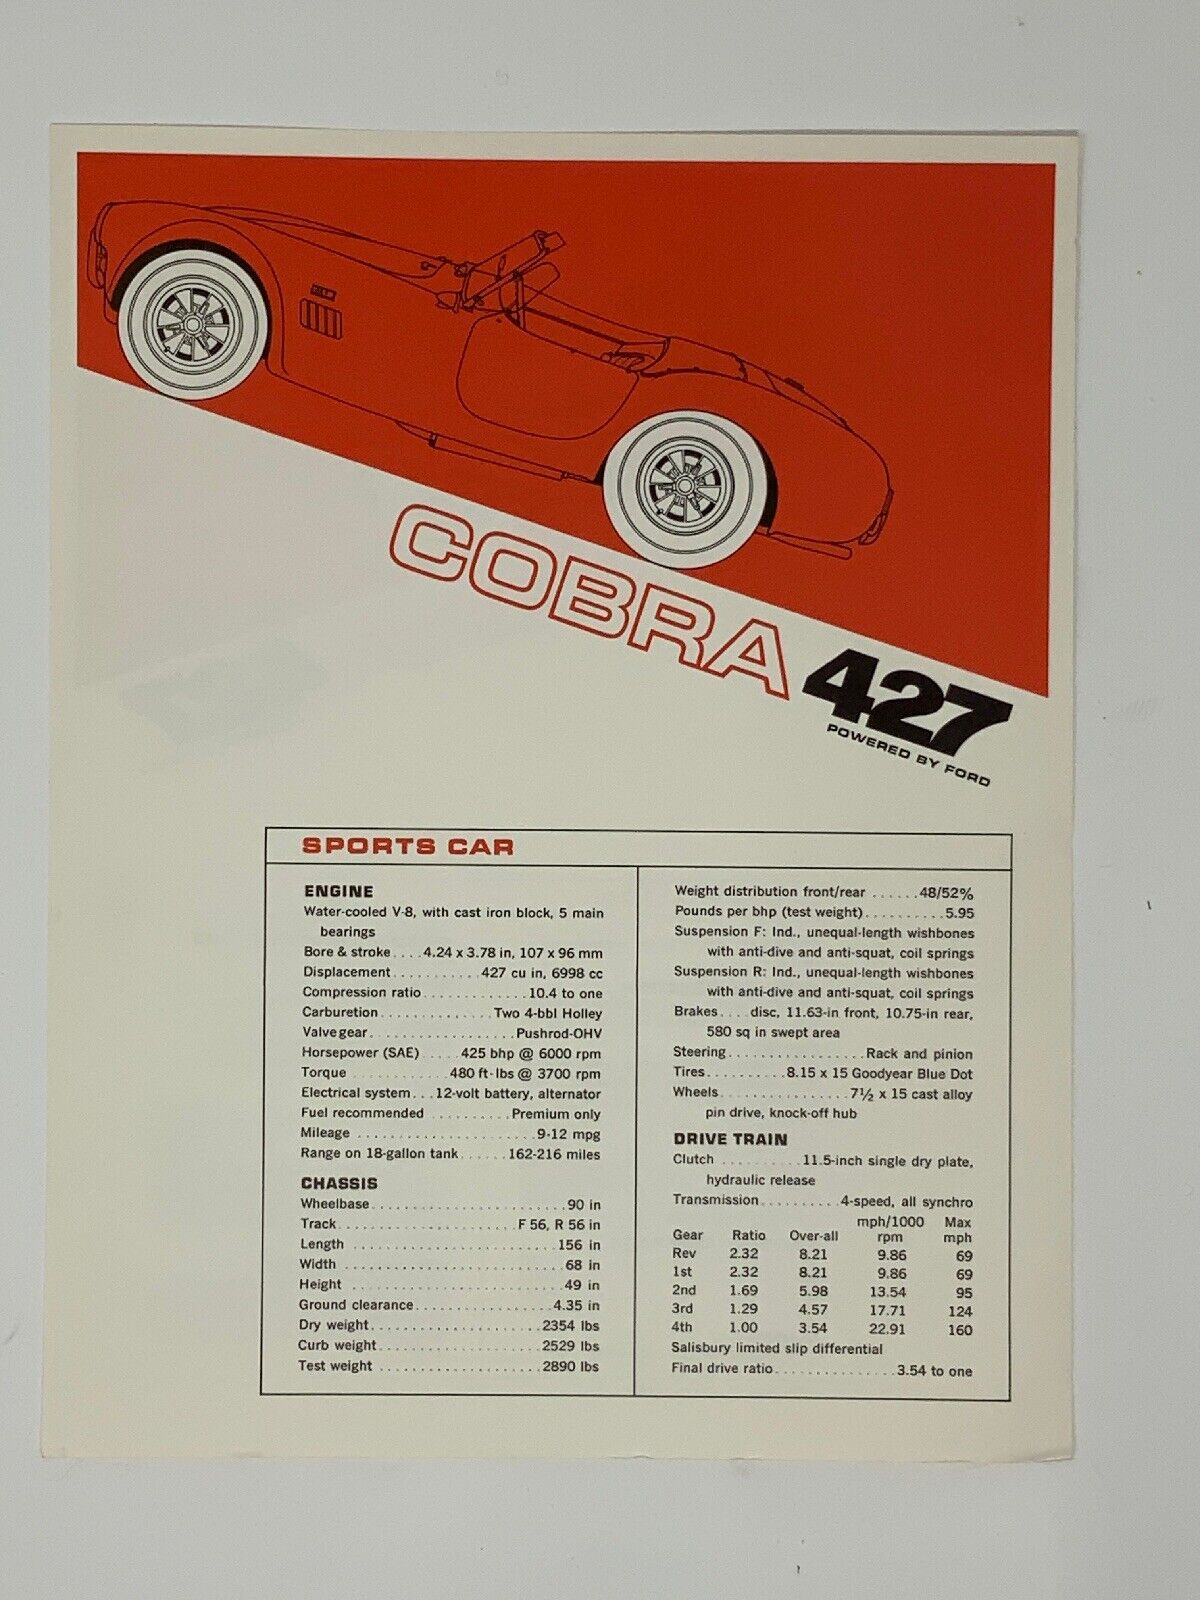 NEW Original  Shelby Cobra 427 Brochure, Sports Car And Competition